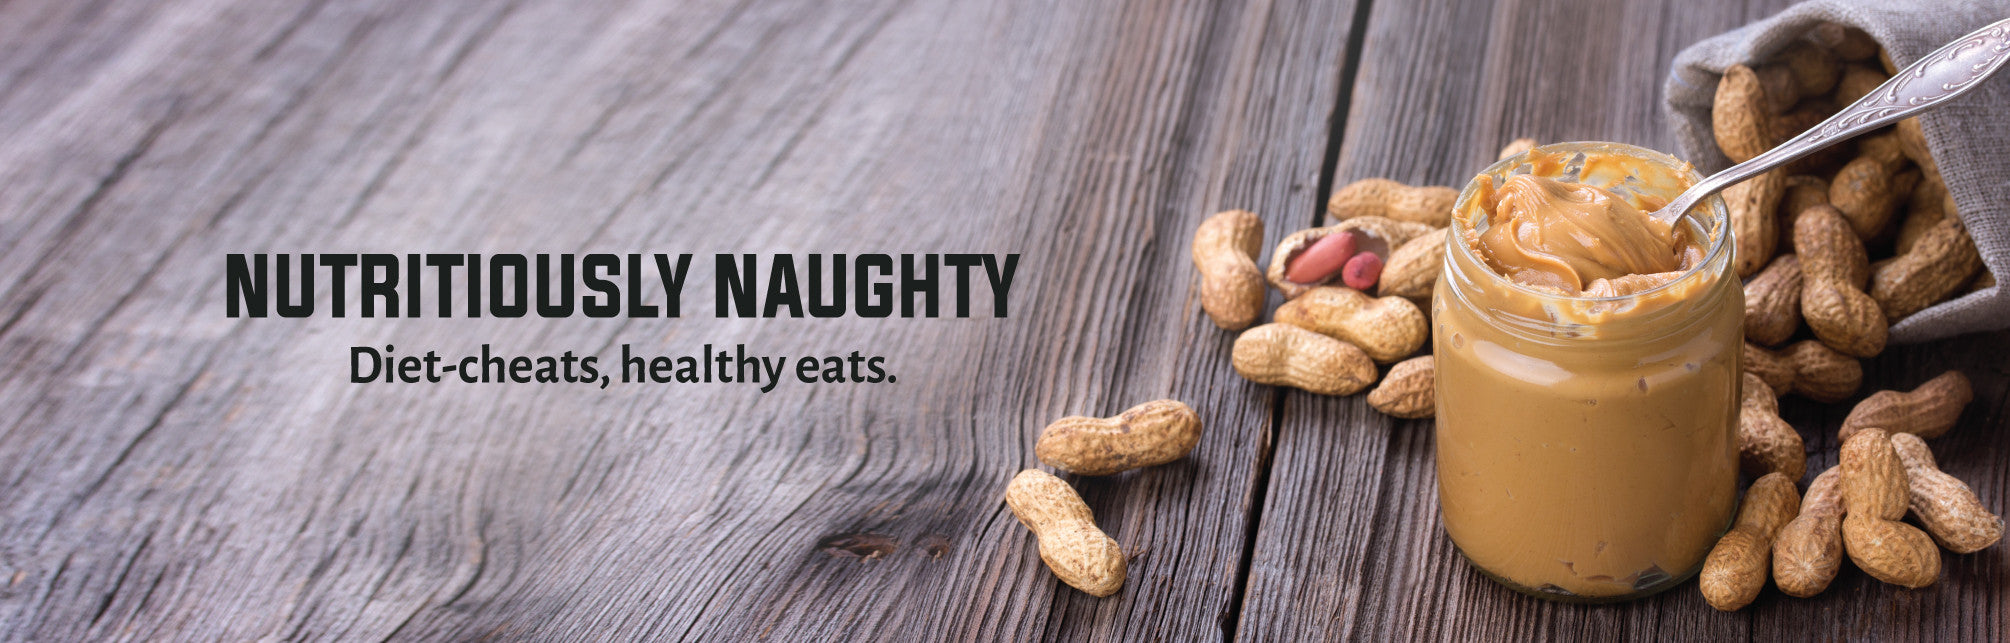 Nutritiously Naughty